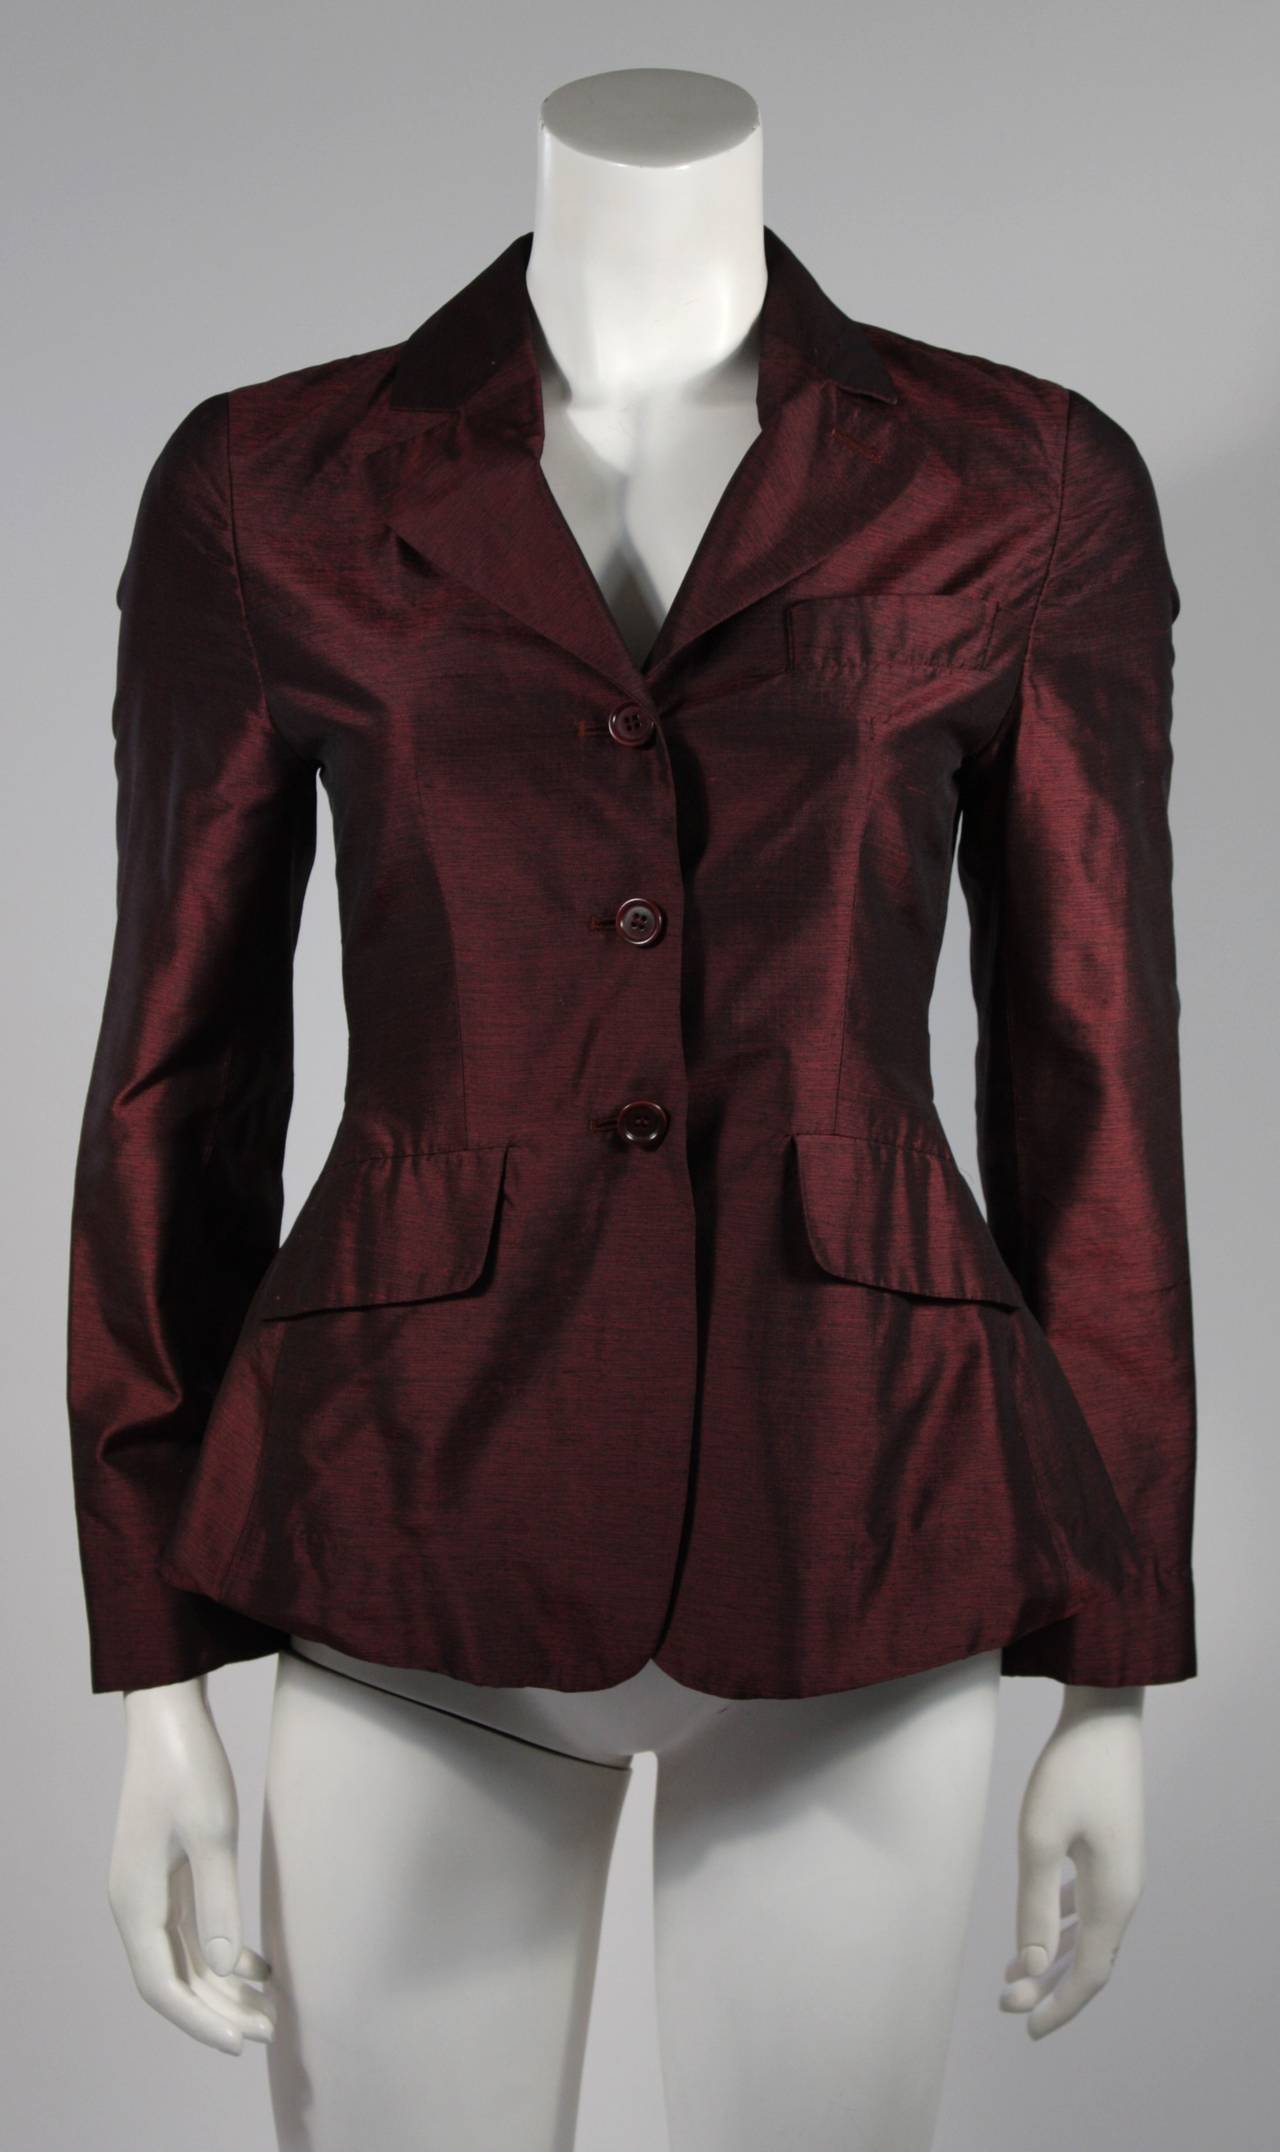 This Romeo Gigli design is available for viewing at our Beverly Hills Boutique. The blazer is composed of a beautiful burgundy (likely) silk fabric. There are three center front button closures. Made in Italy.

Feel free to inquire about our